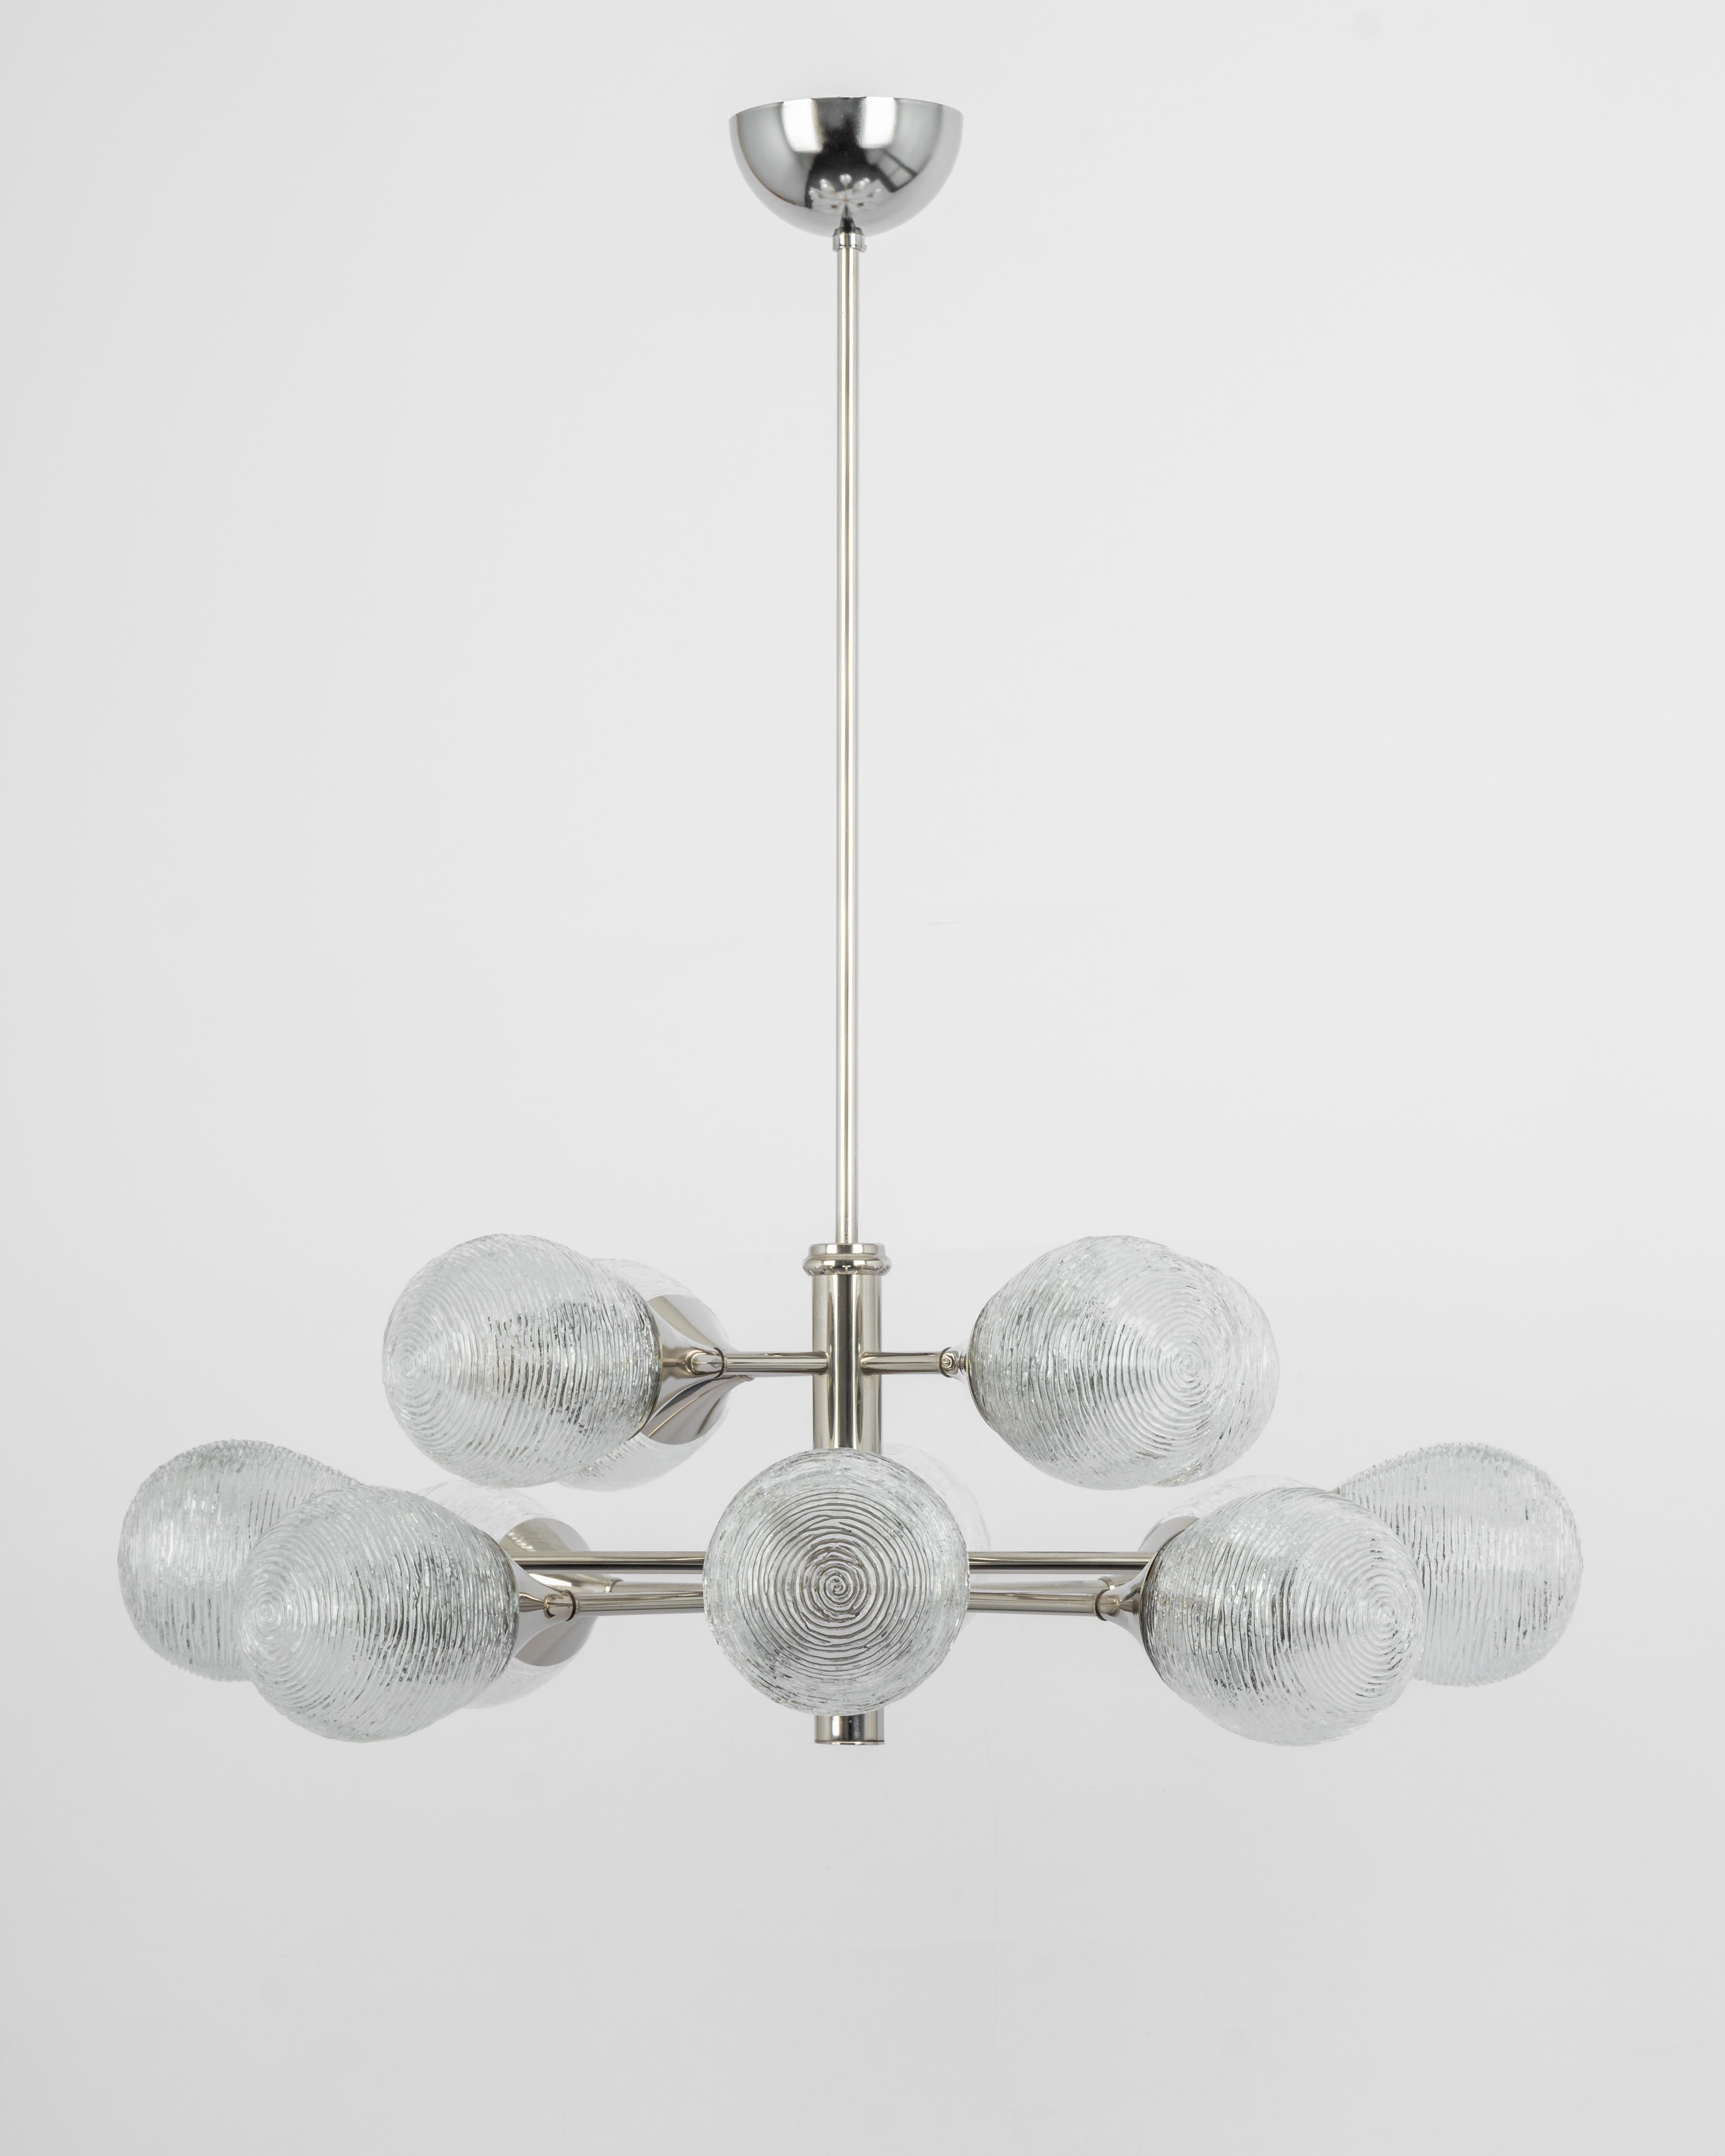 Stunning Sputnik chrome chandelier with 12 glass globes by Kaiser Leuchten, Germany, 1970s.
High quality and in very good condition. Cleaned, well-wired, and ready to use. 

The fixture requires 12 x E14 small bulbs with 40W max each.
Light bulbs